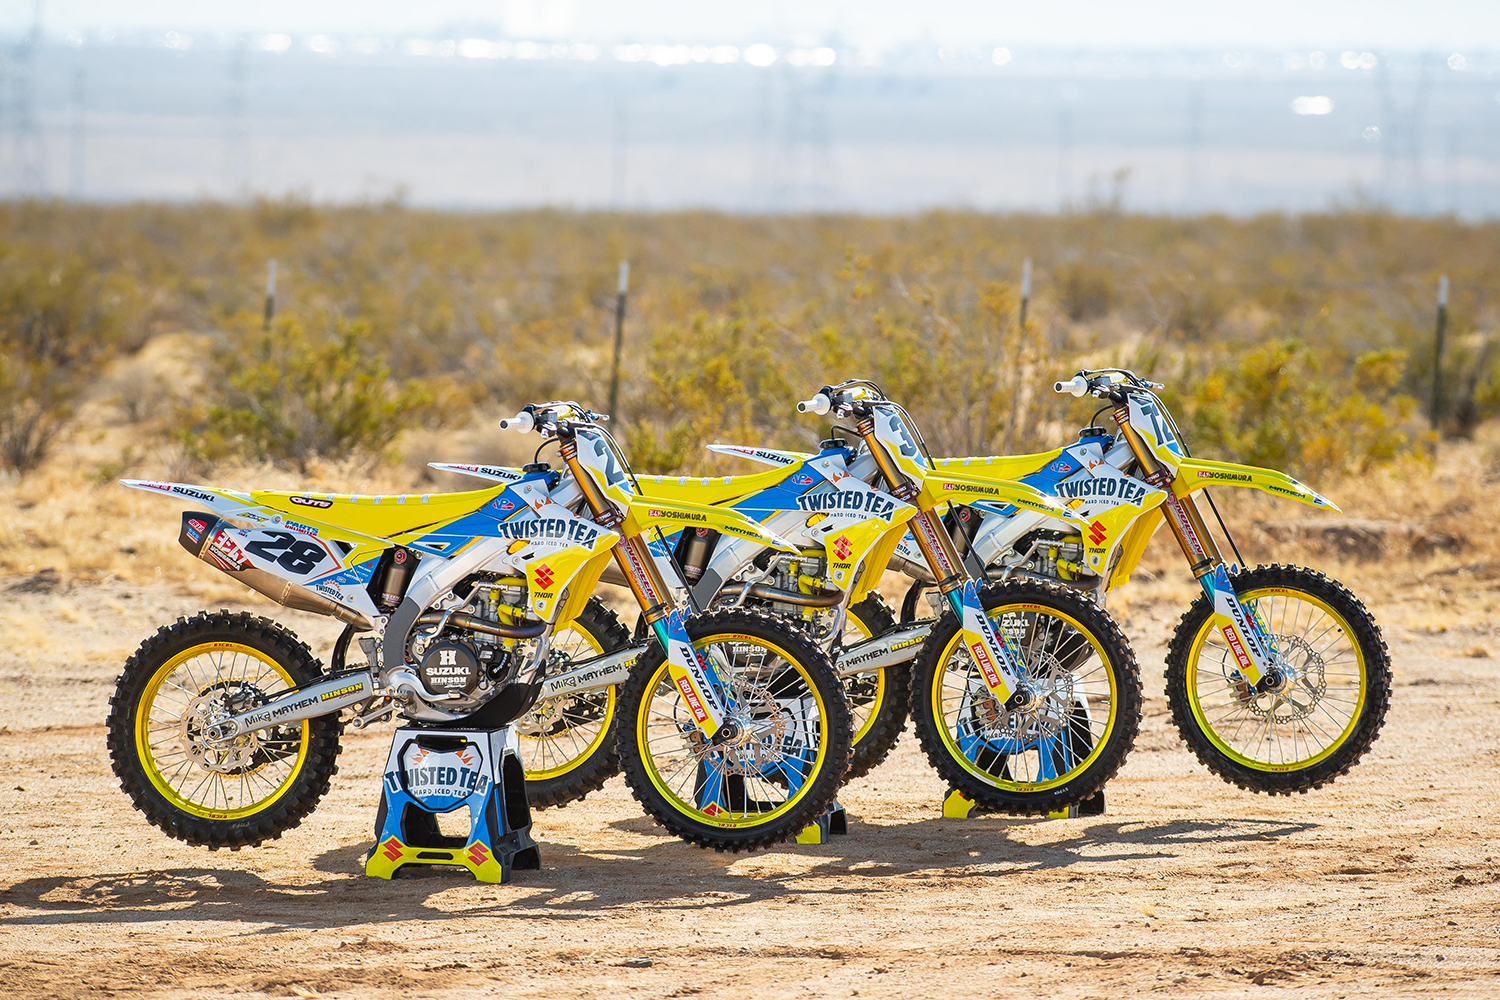 First Look at the Twisted Tea Suzuki Factory Racing Team Swapmoto Live